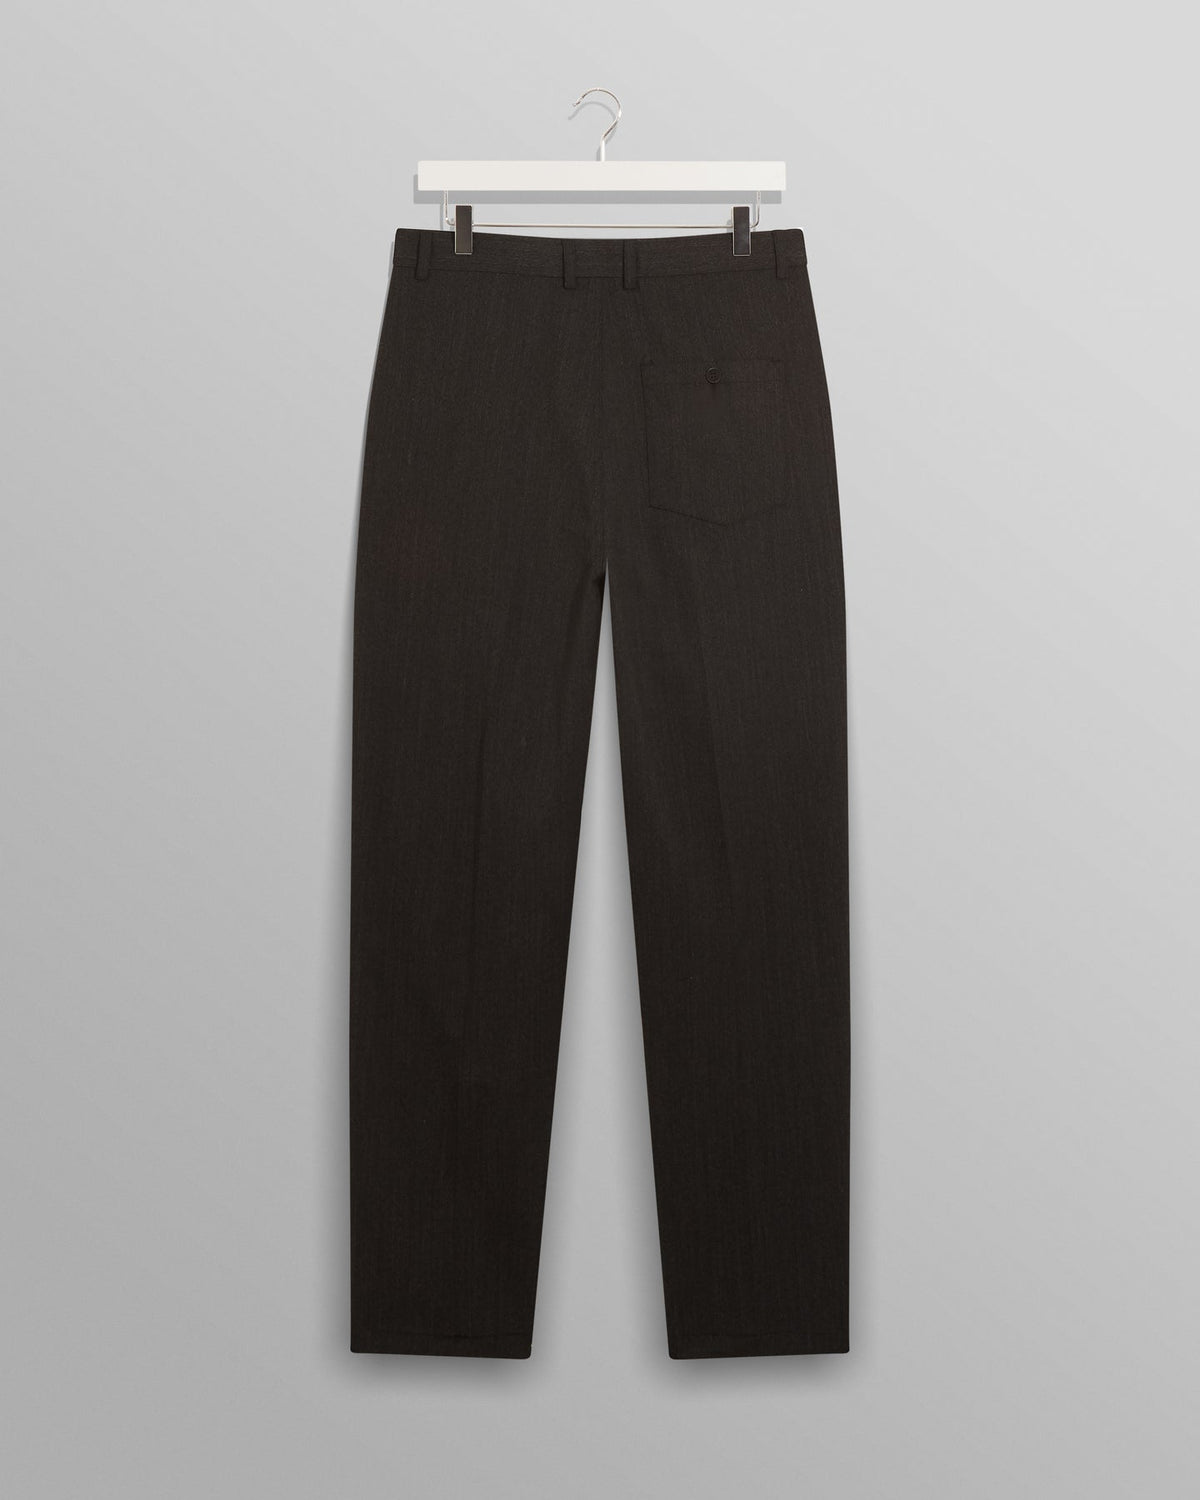 Raleigh Trousers - Charcoal